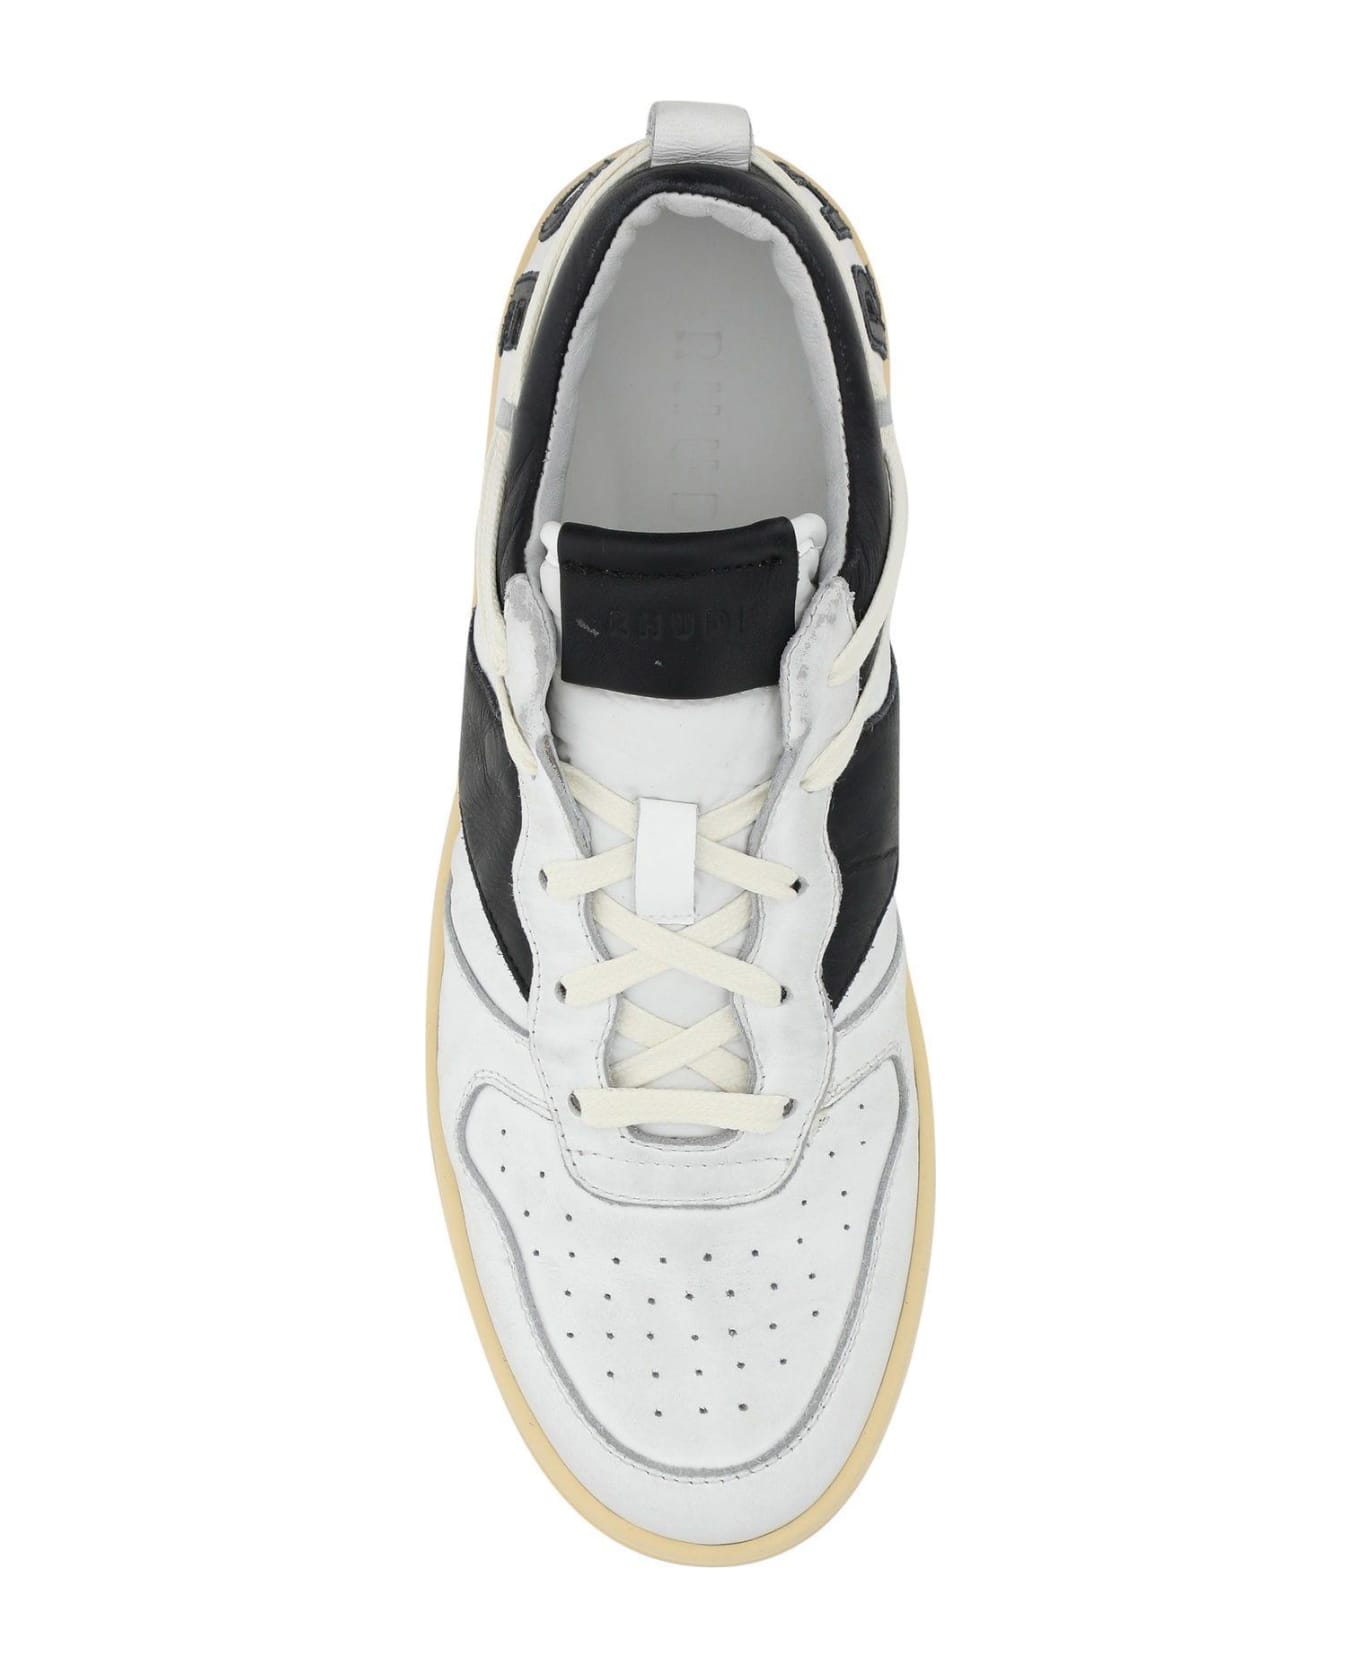 Rhude Two-tone Leather Rhecess Sneakers - WHITE/BLACK